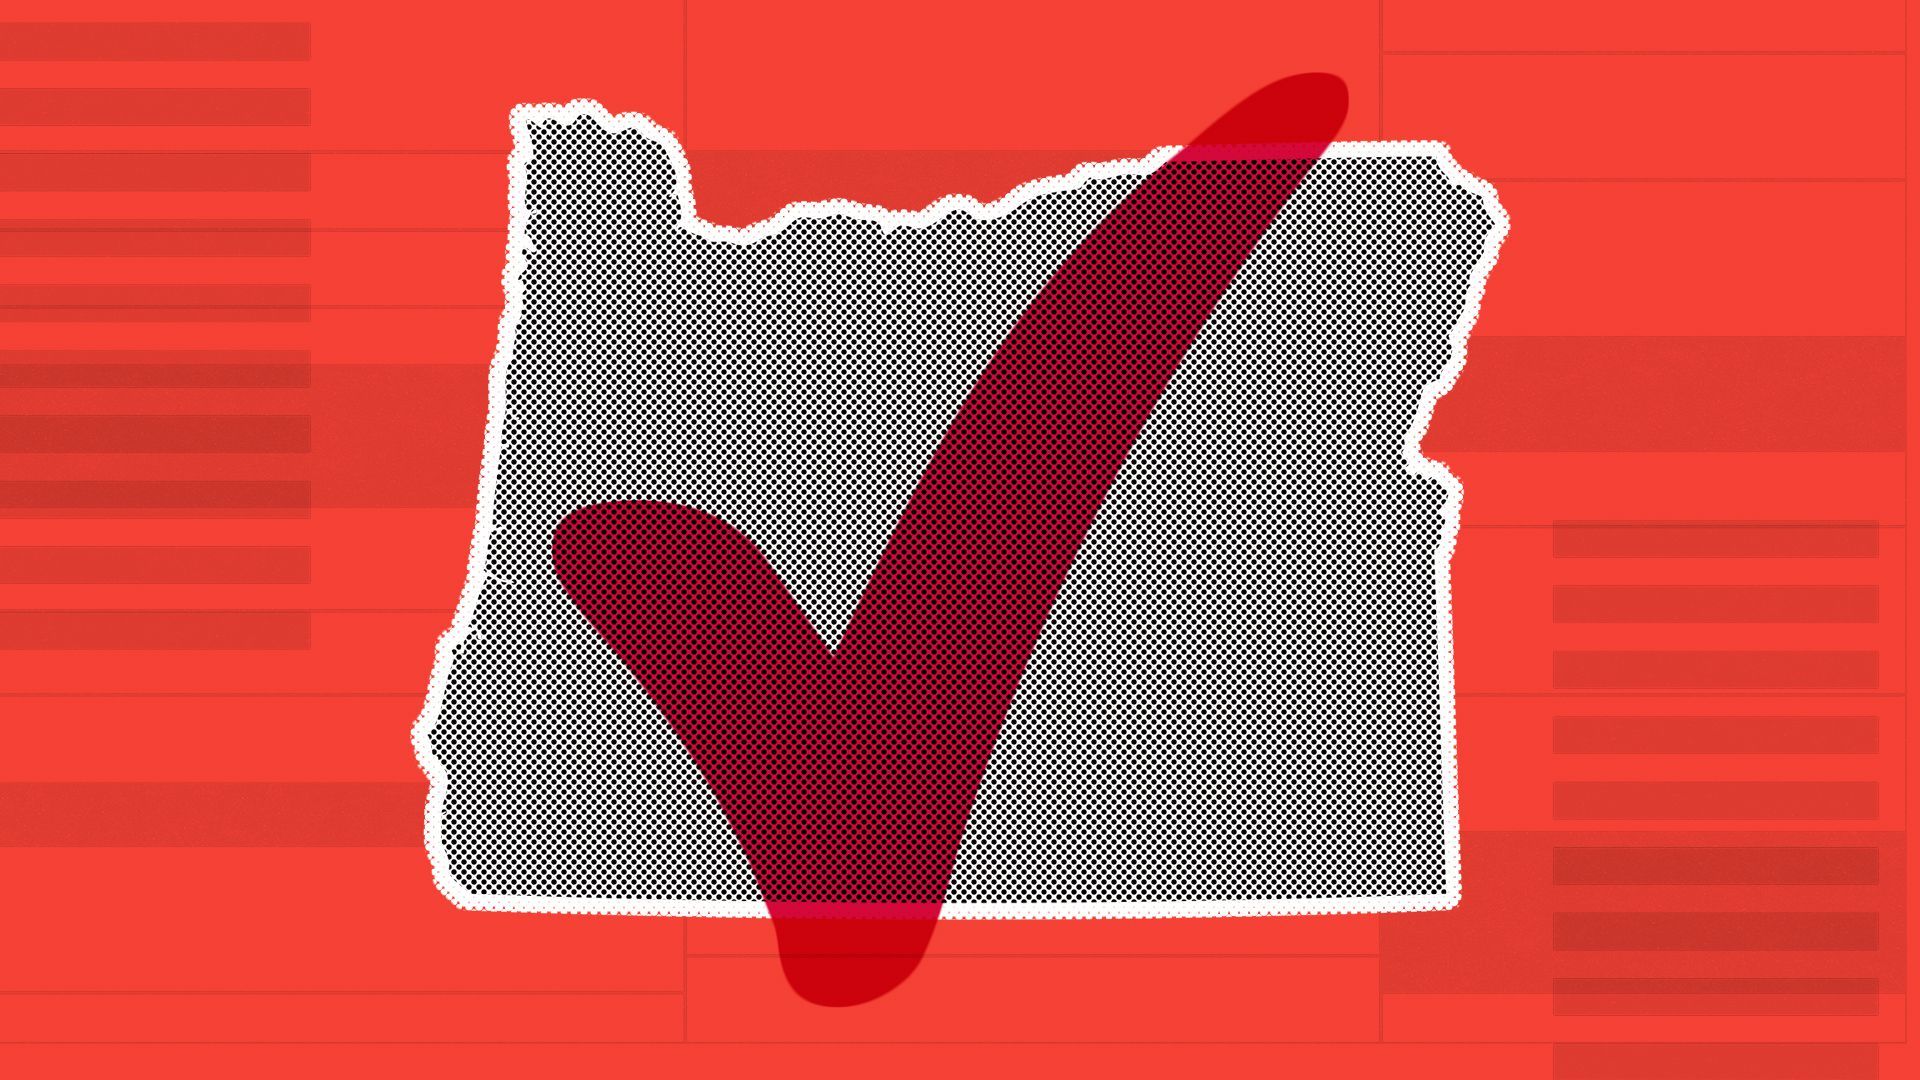 Illustration of Oregon with a checkmark.